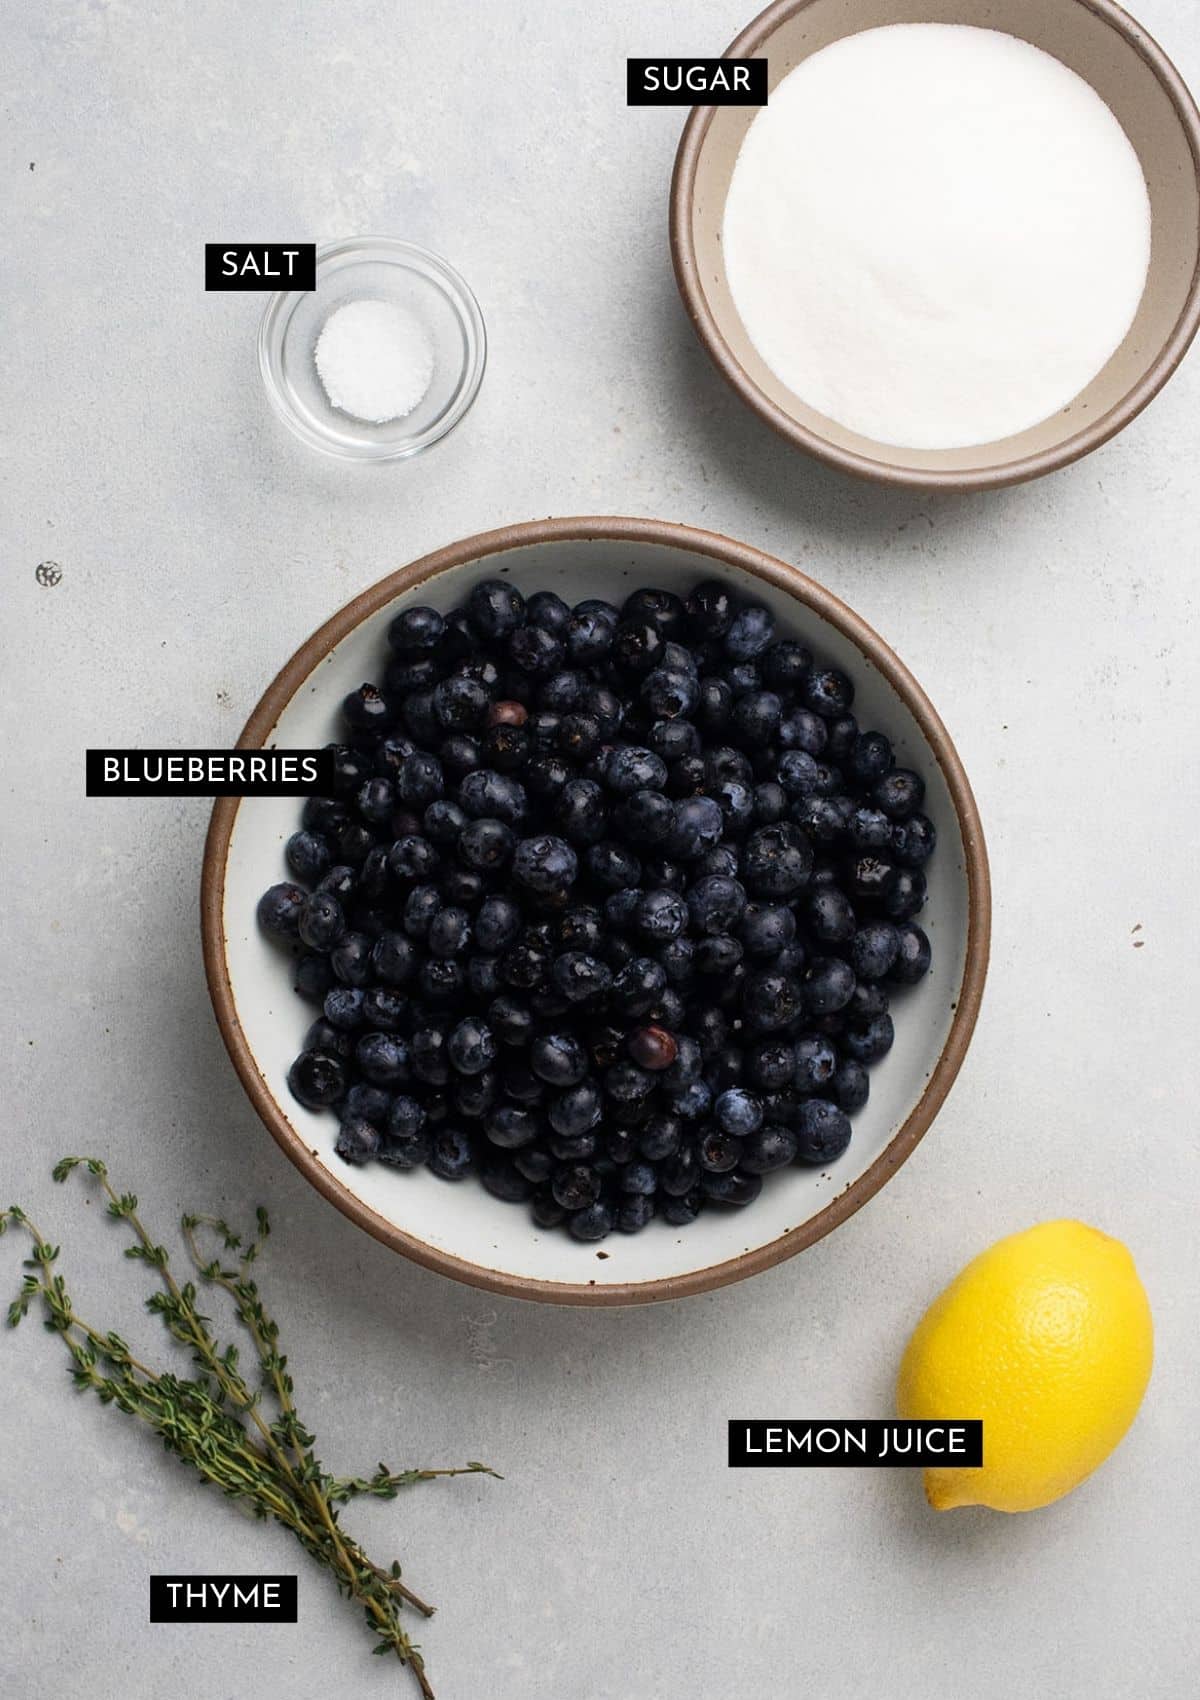 Blueberries, thyme, sugar, and a lemon on a white table.